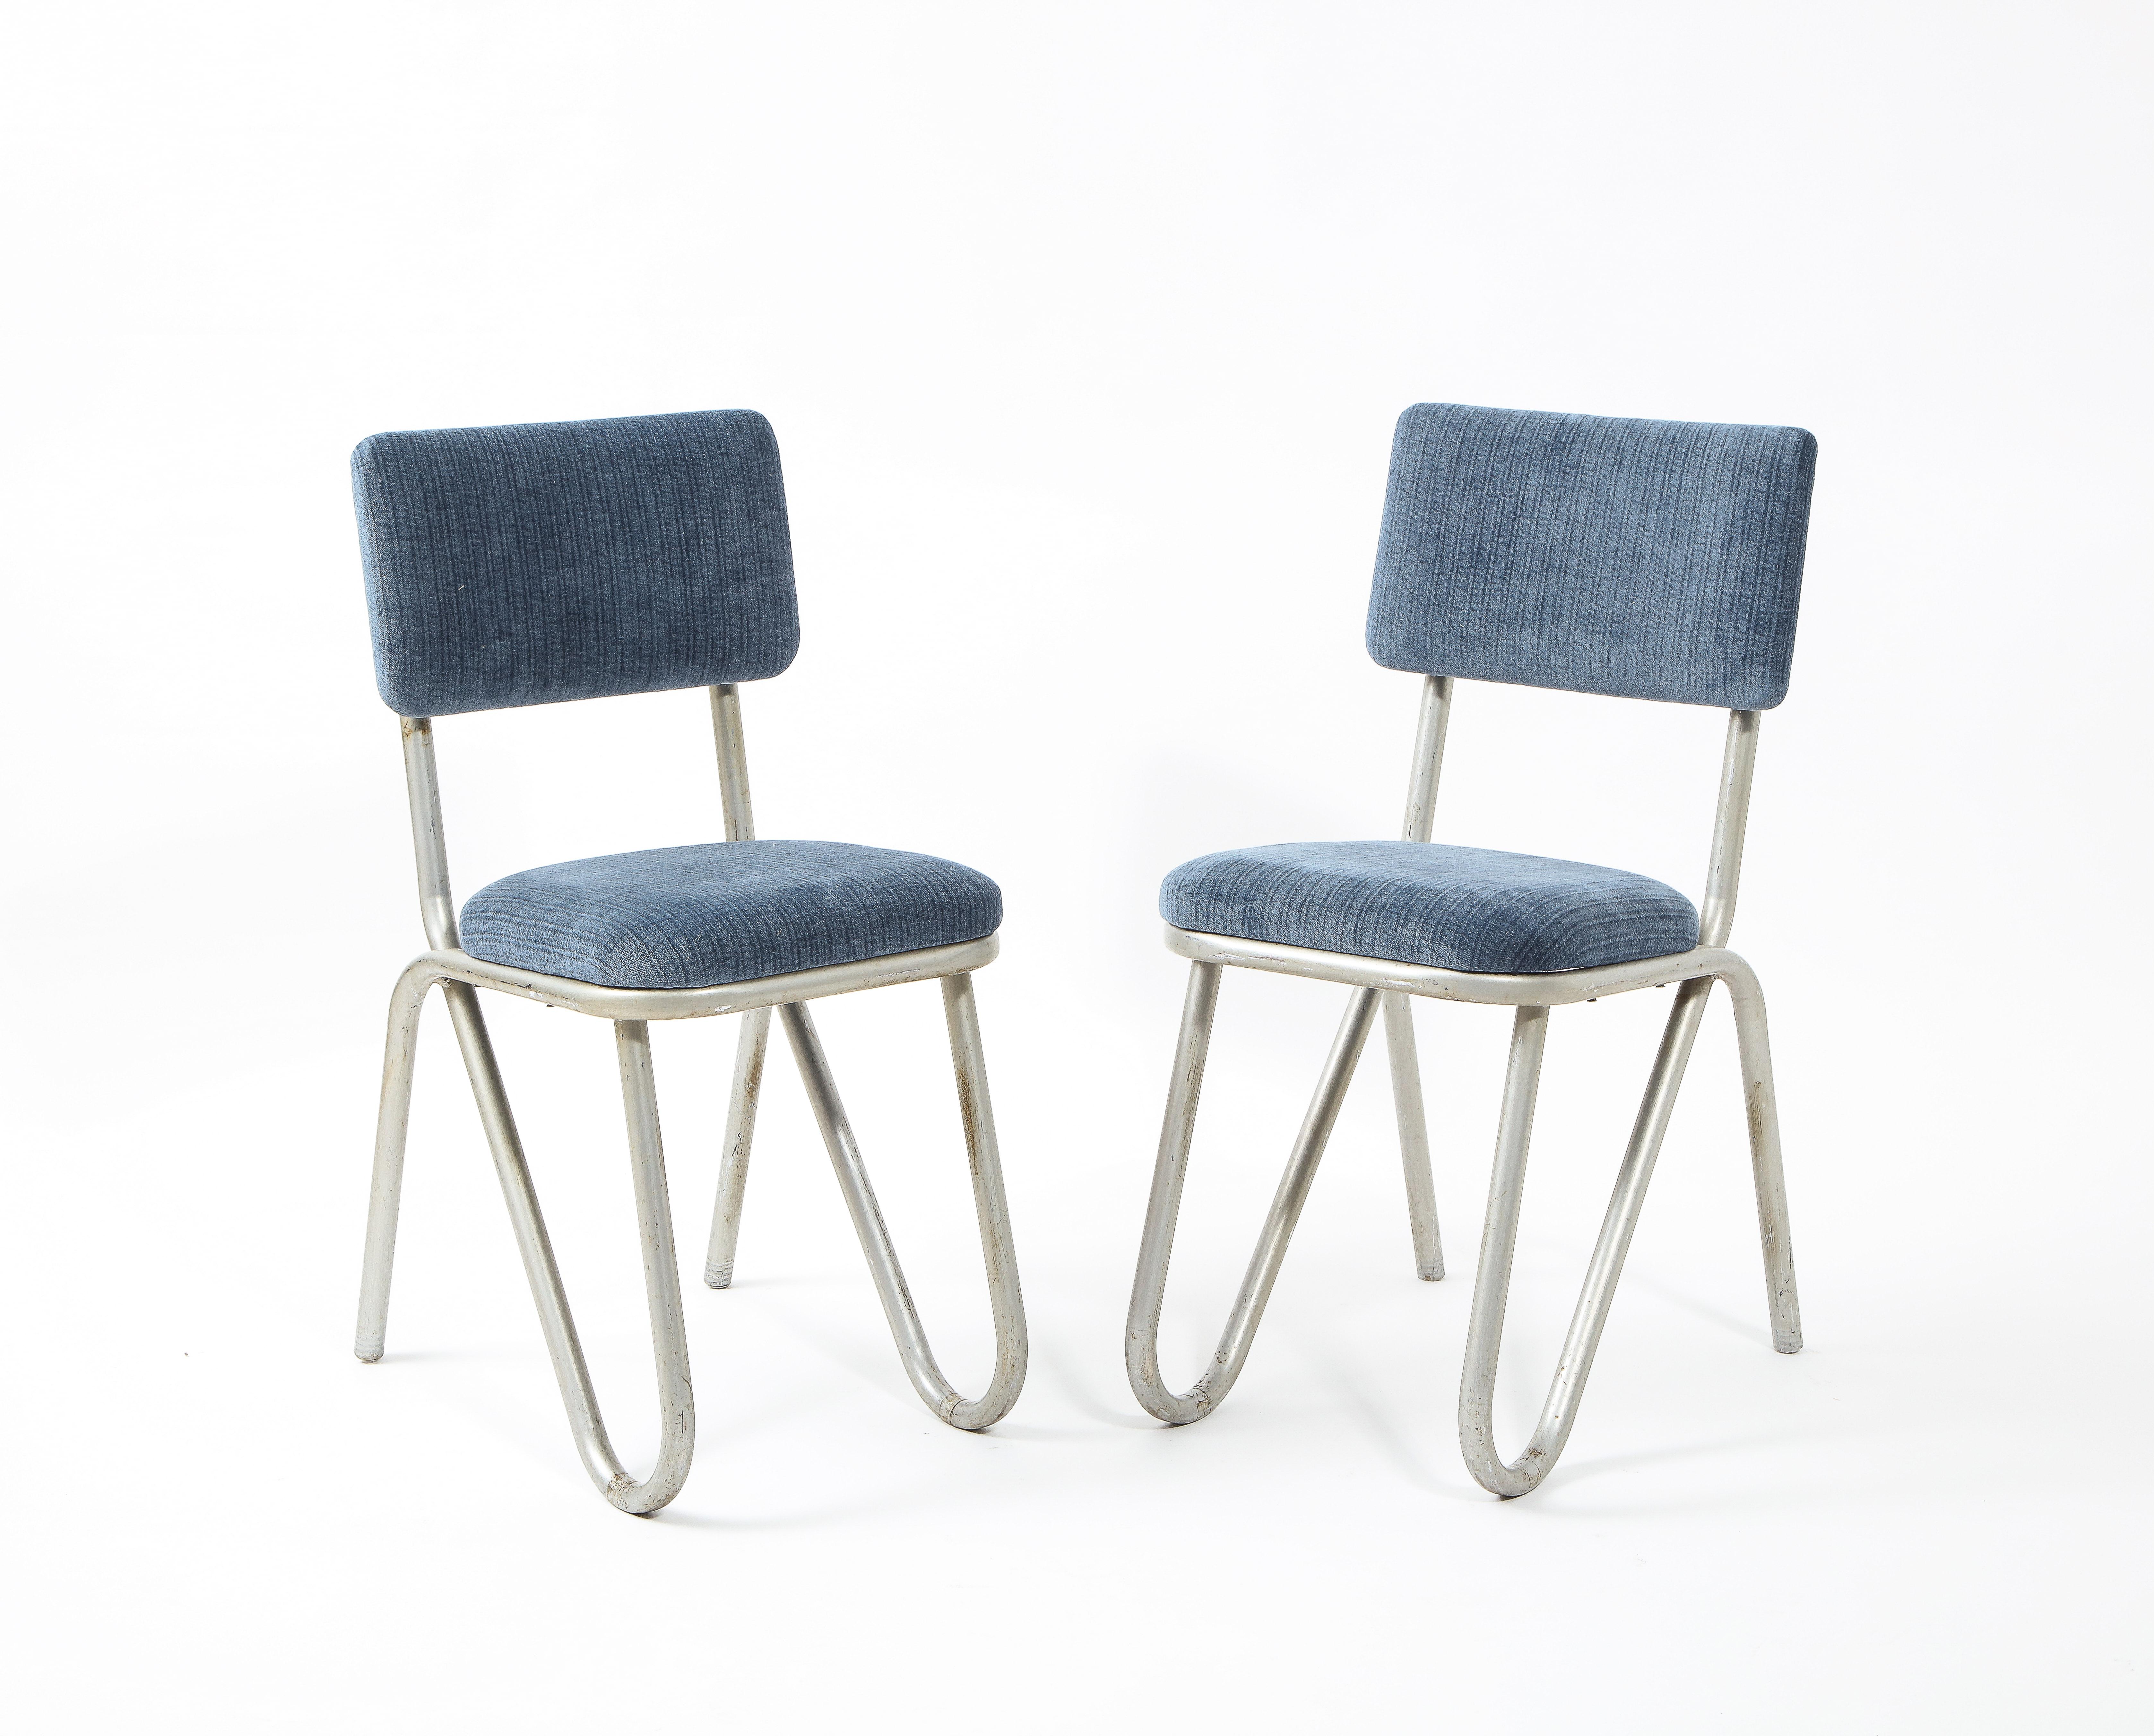 A pair of modernist chairs reminiscent of the 